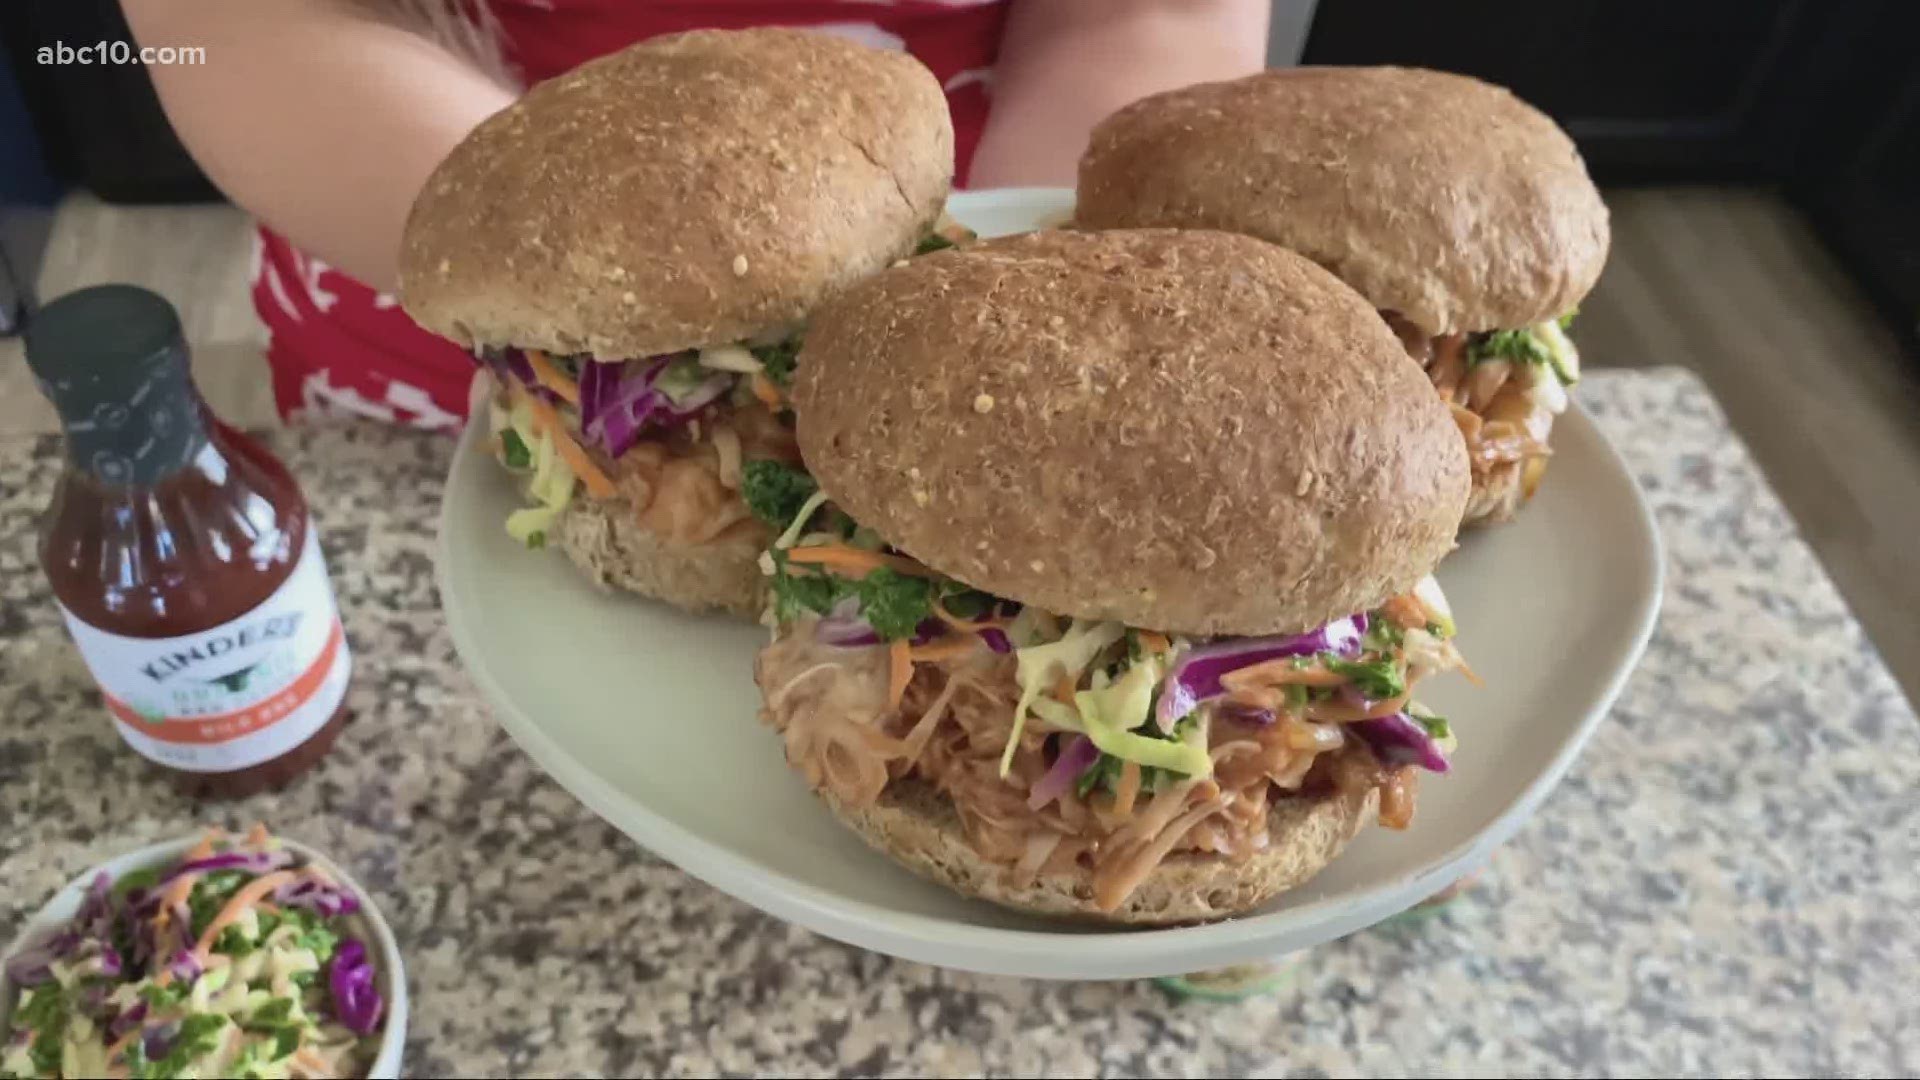 A backyard bbq can be delicious even without the meat. Megan Evan's shares her recipe for flavorful jackfruit sandwiches!